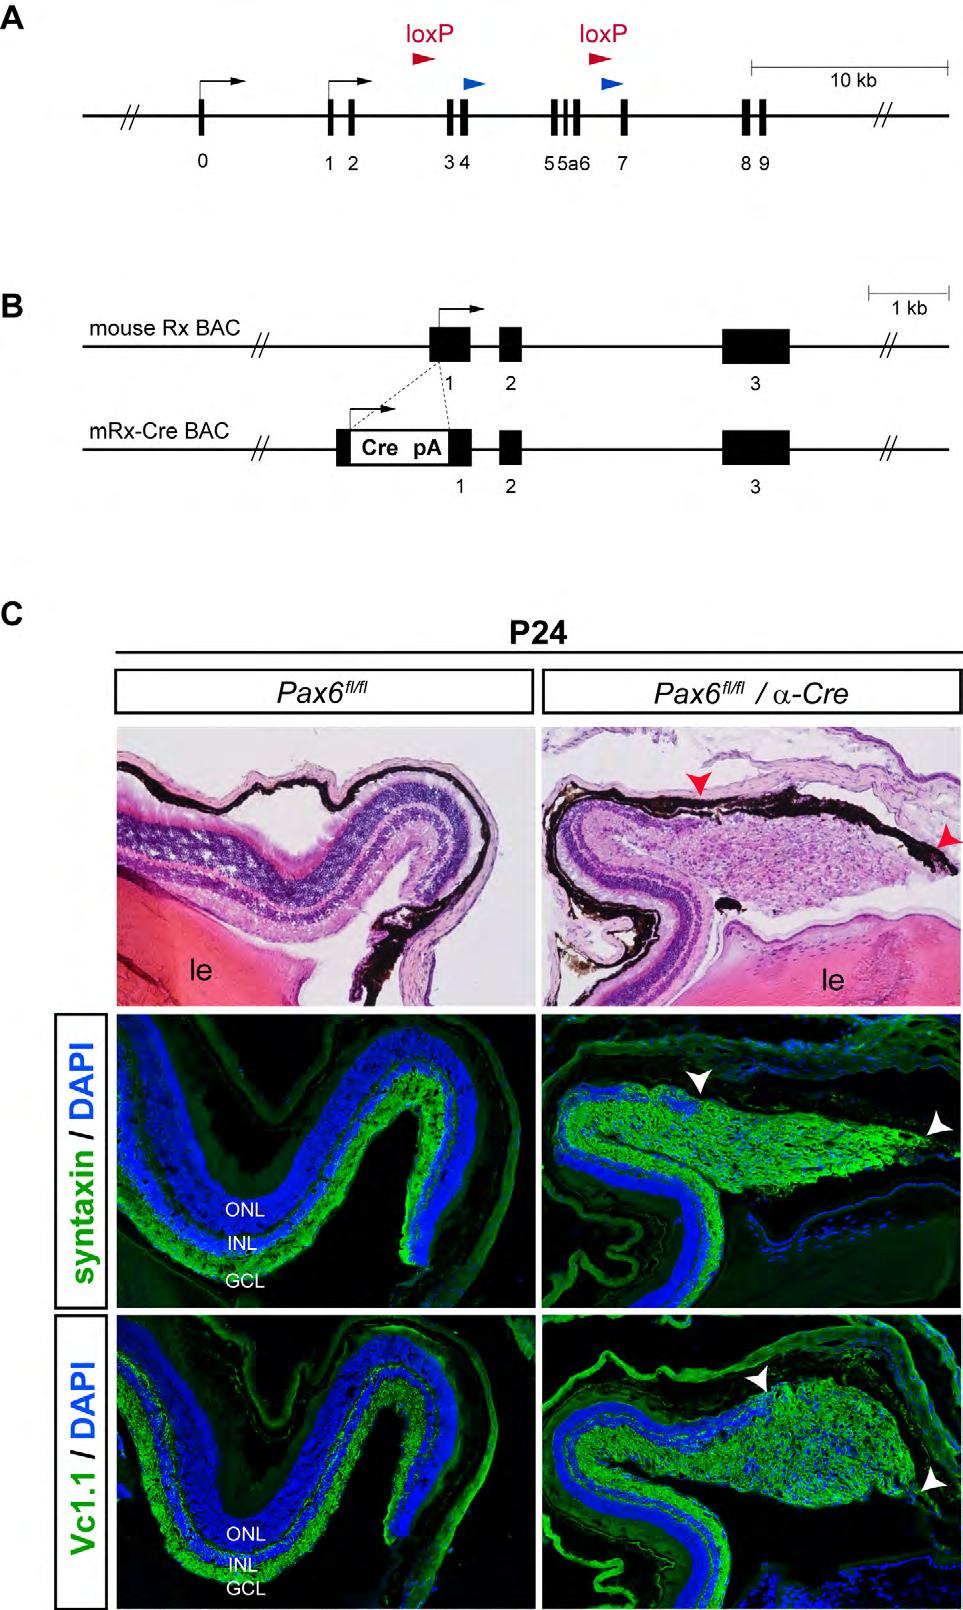 Supplementary Fig. S1. Schematic representation of mouse lines Pax6 fl/fl and mrx-cre used in this study.